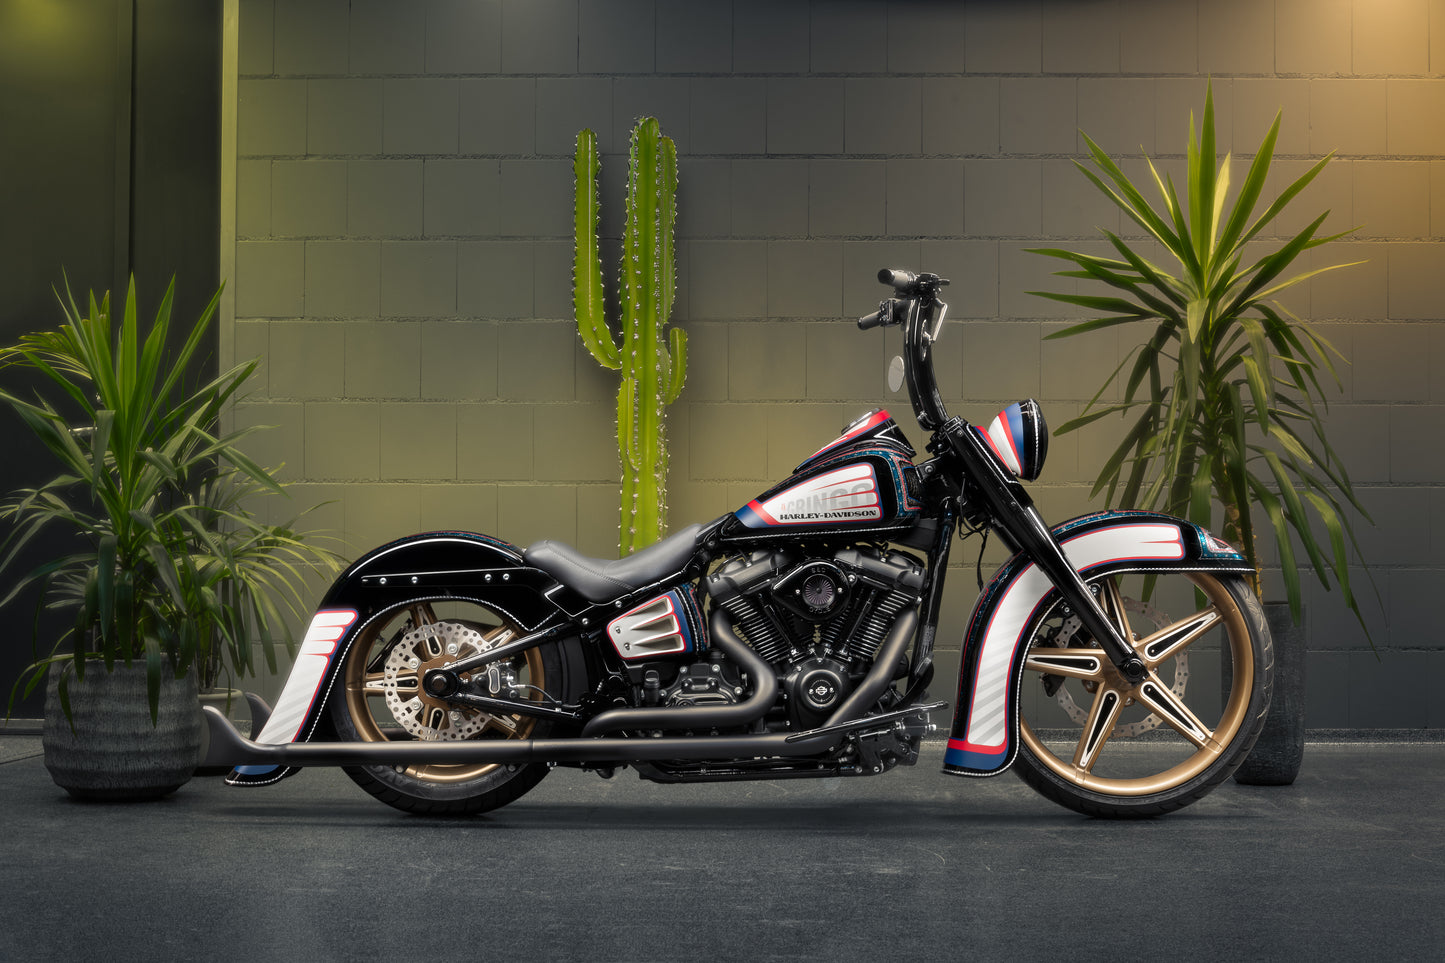 Harley Davidson motorcycle with Killer Custom rear fender from the side in an industrial environment